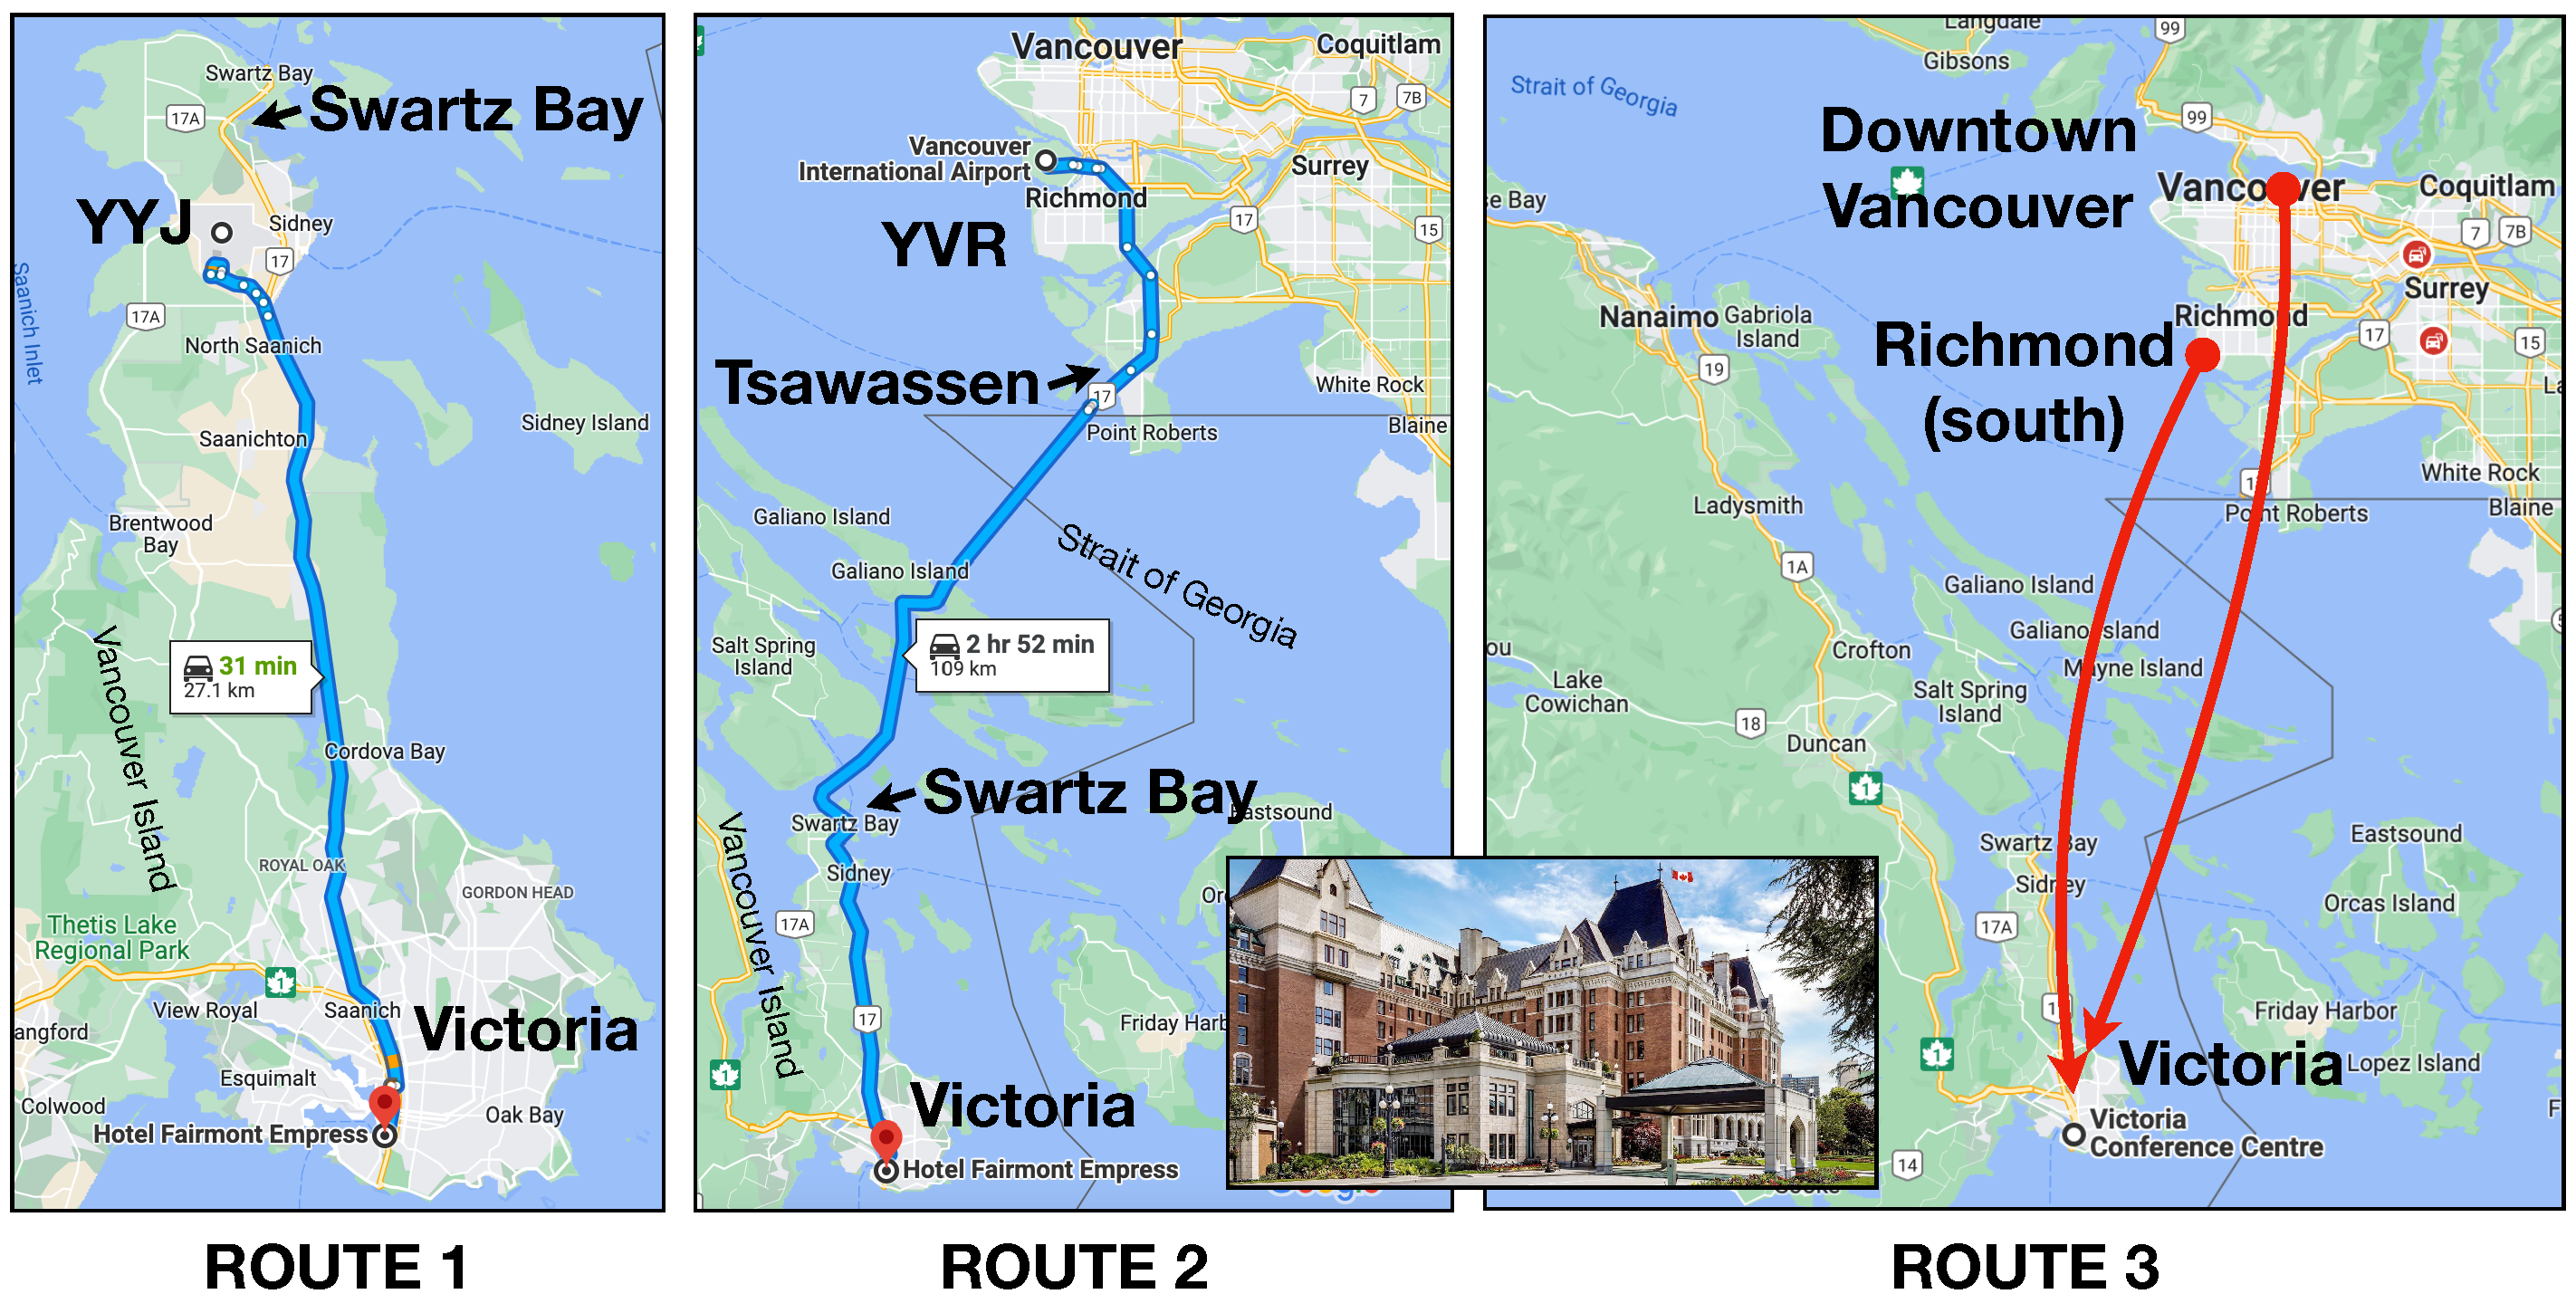 Directions to Victoria